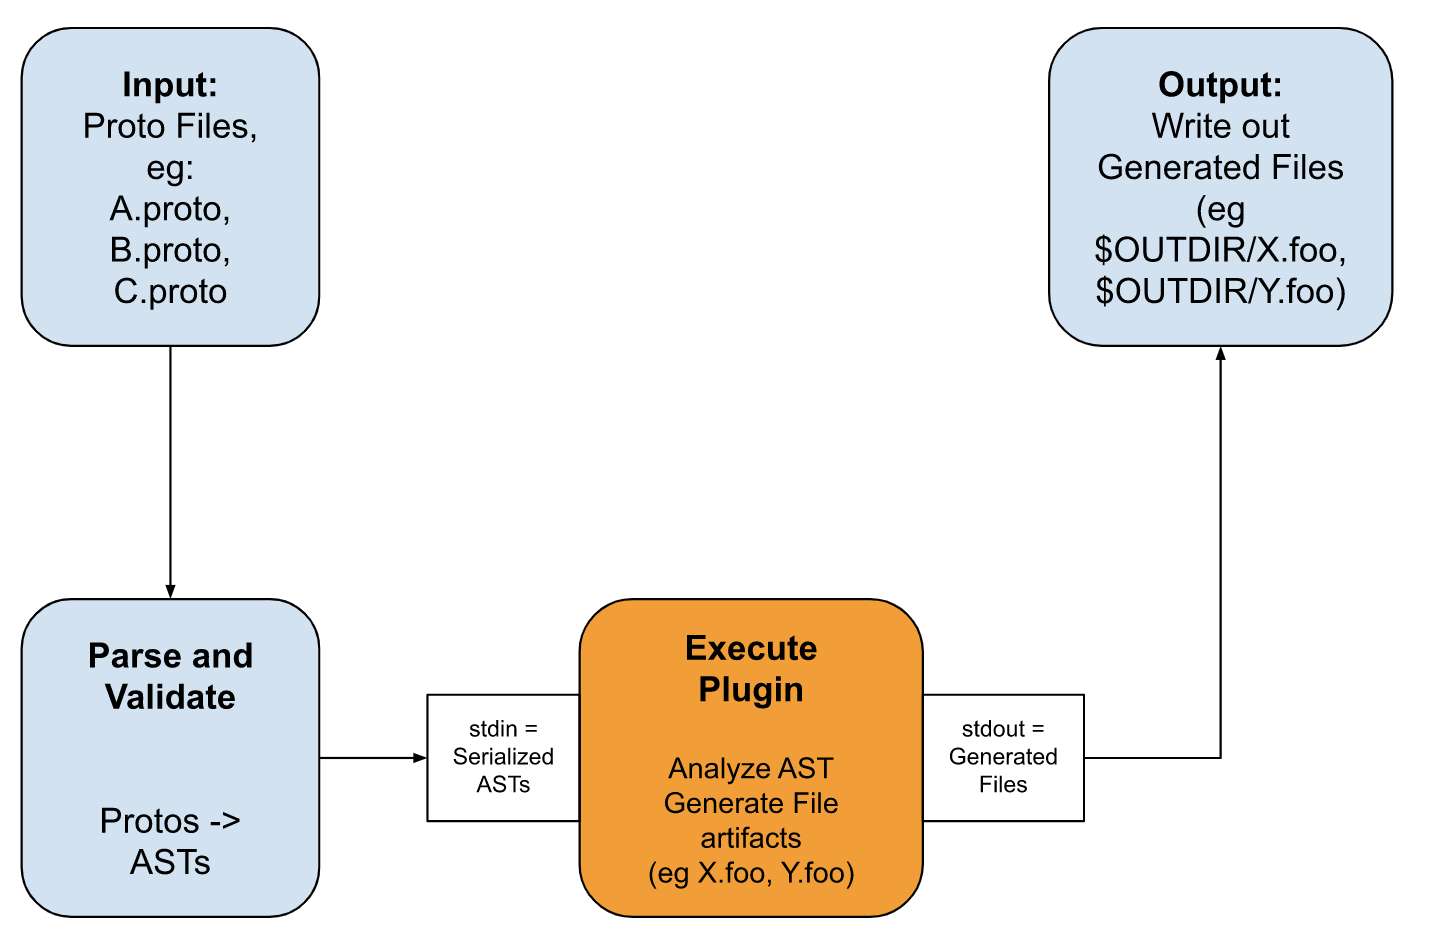 Protoc orchestrates plugins by passing the parsed Abstract Syntax Tree (AST) across plugins